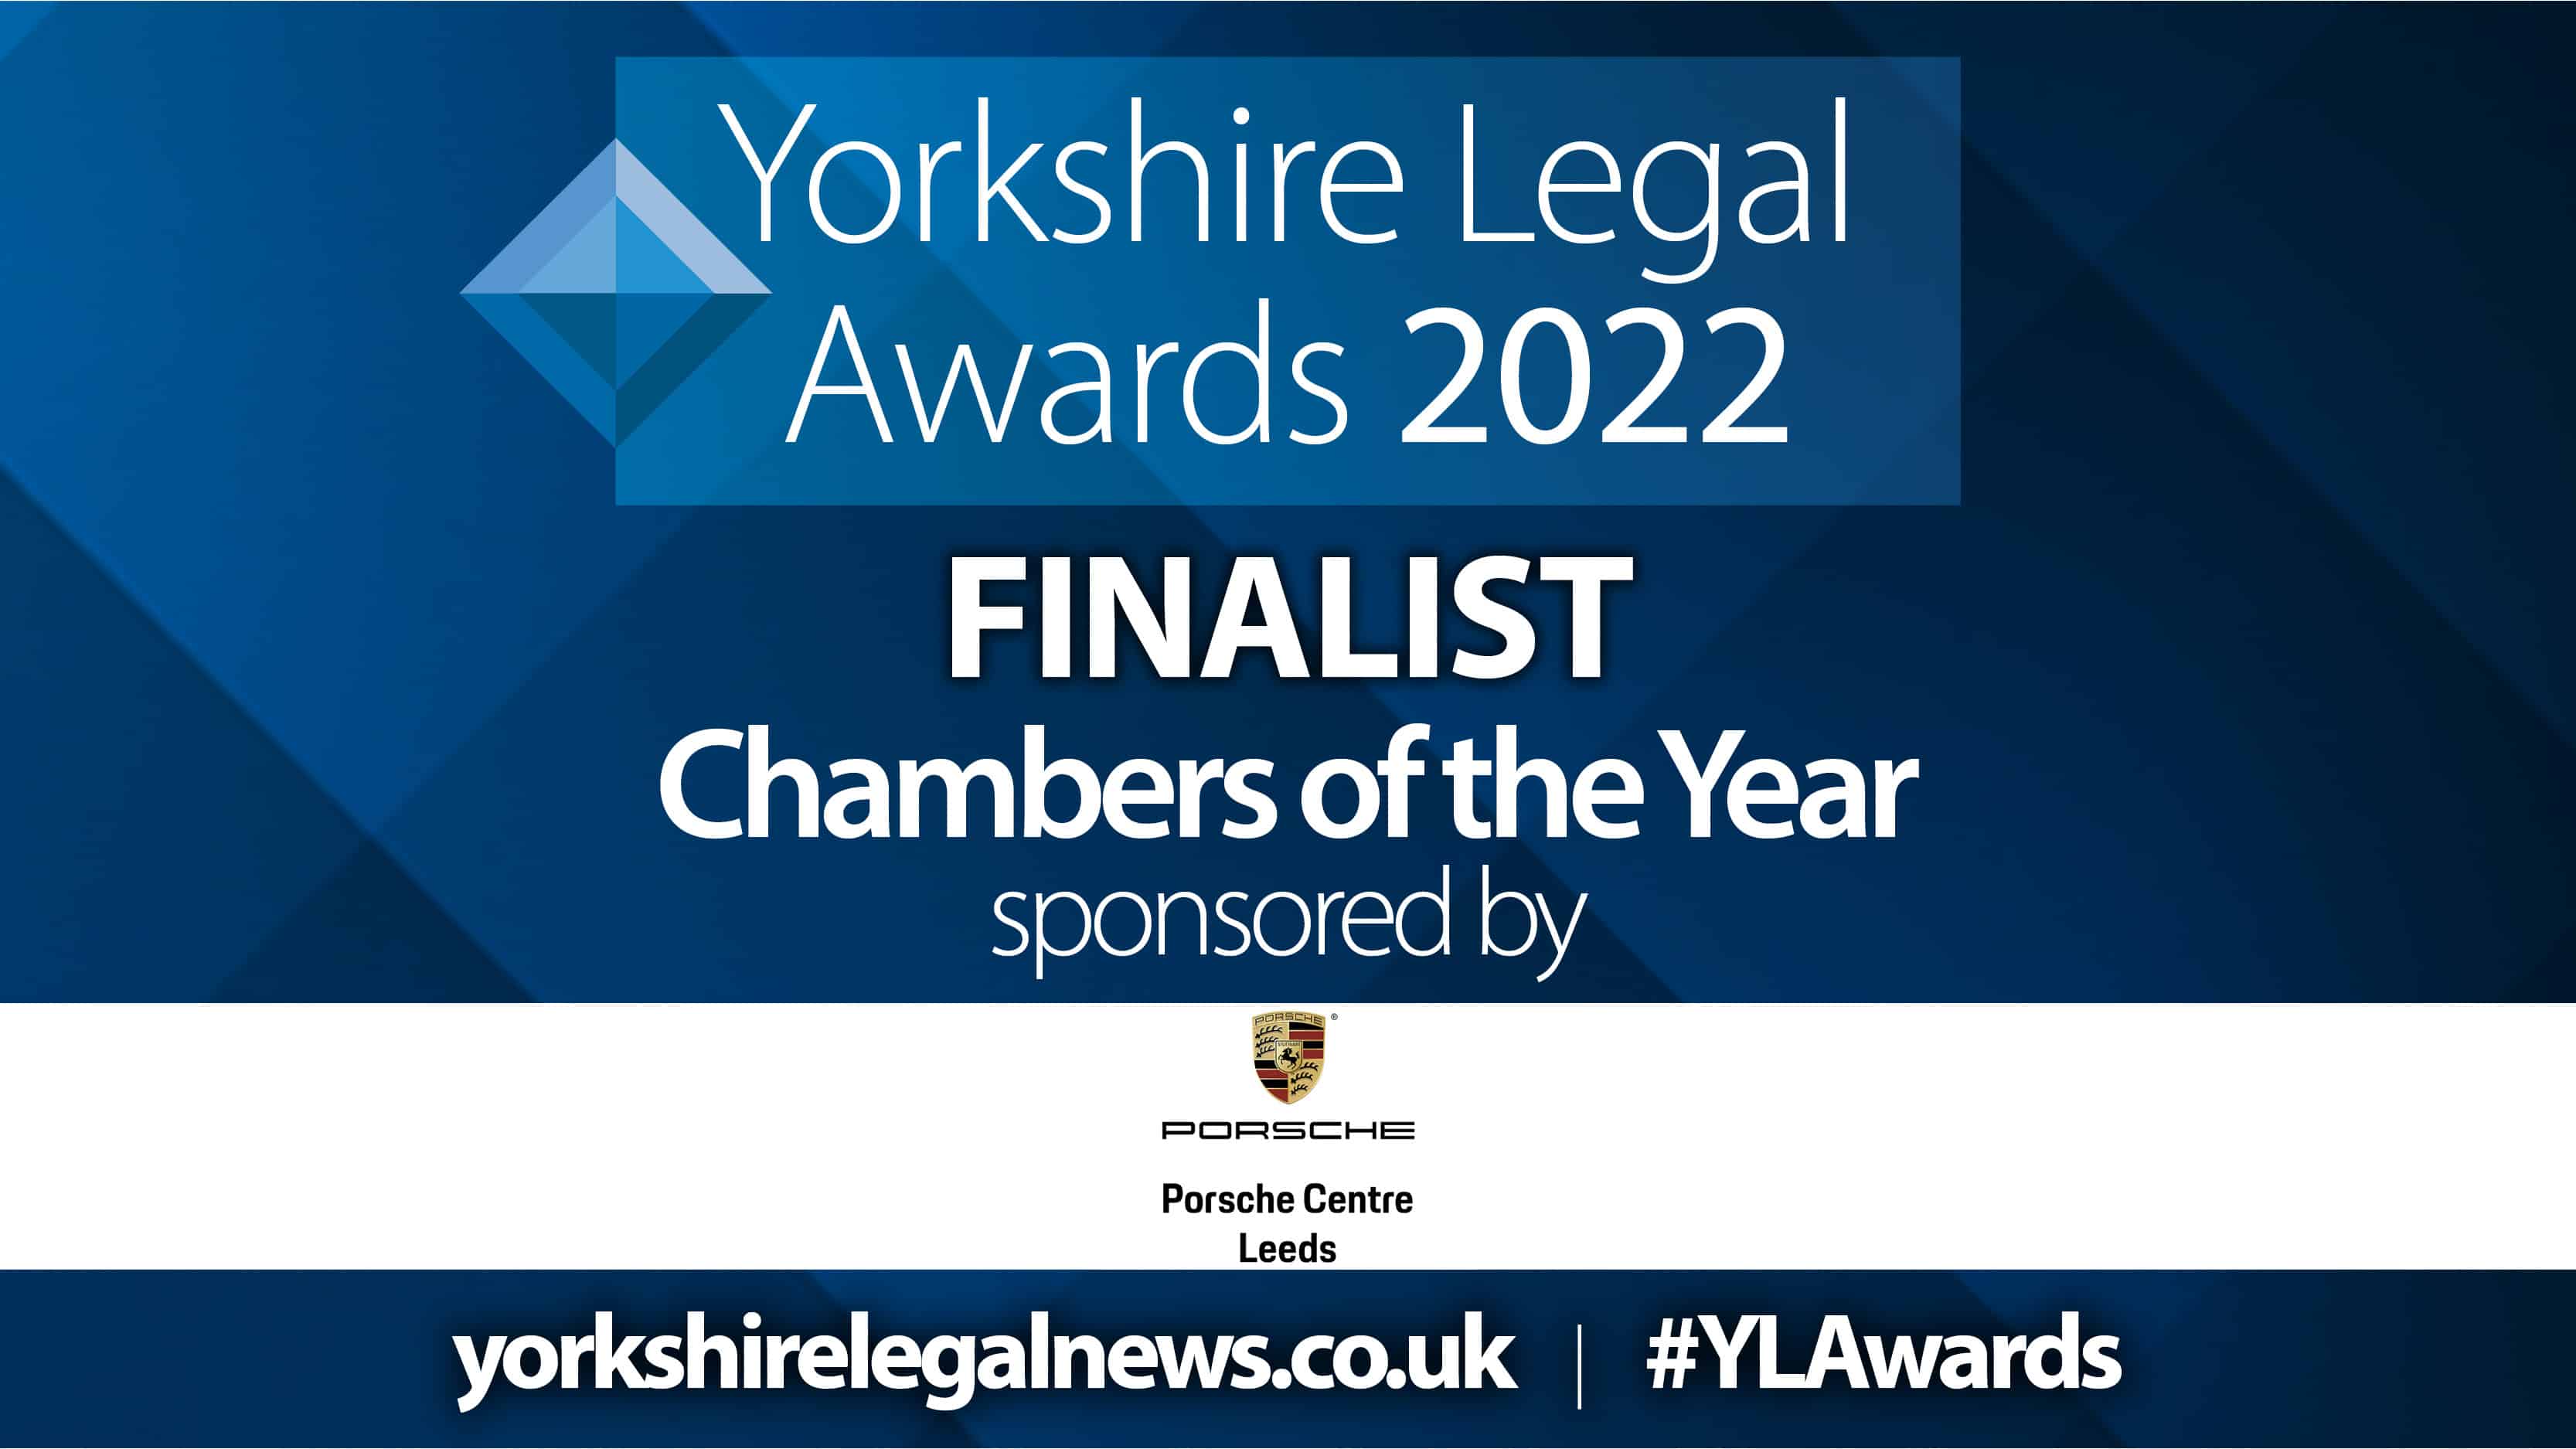 Parklane Plowden are double finalists at the Yorkshire Legal Awards, 2022